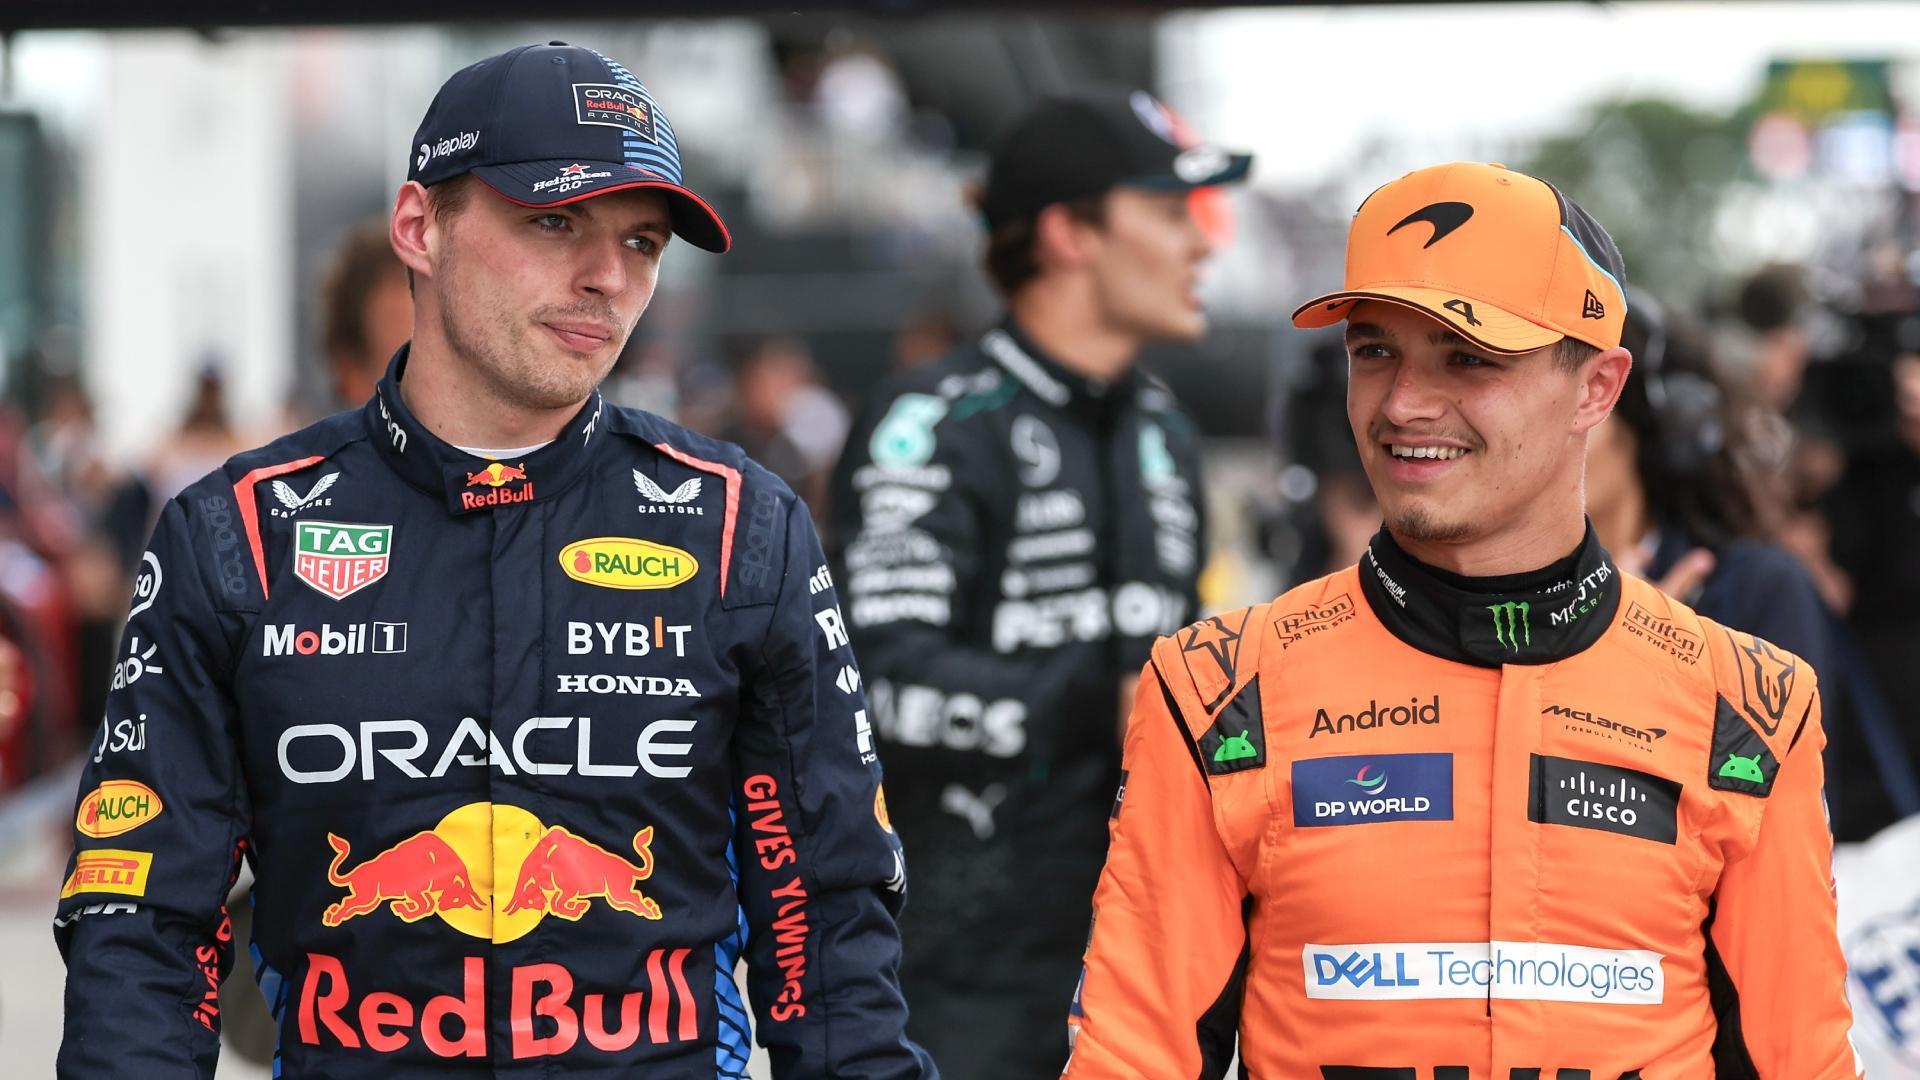 Can Lando Norris catch Max Verstappen in the F1 title race?